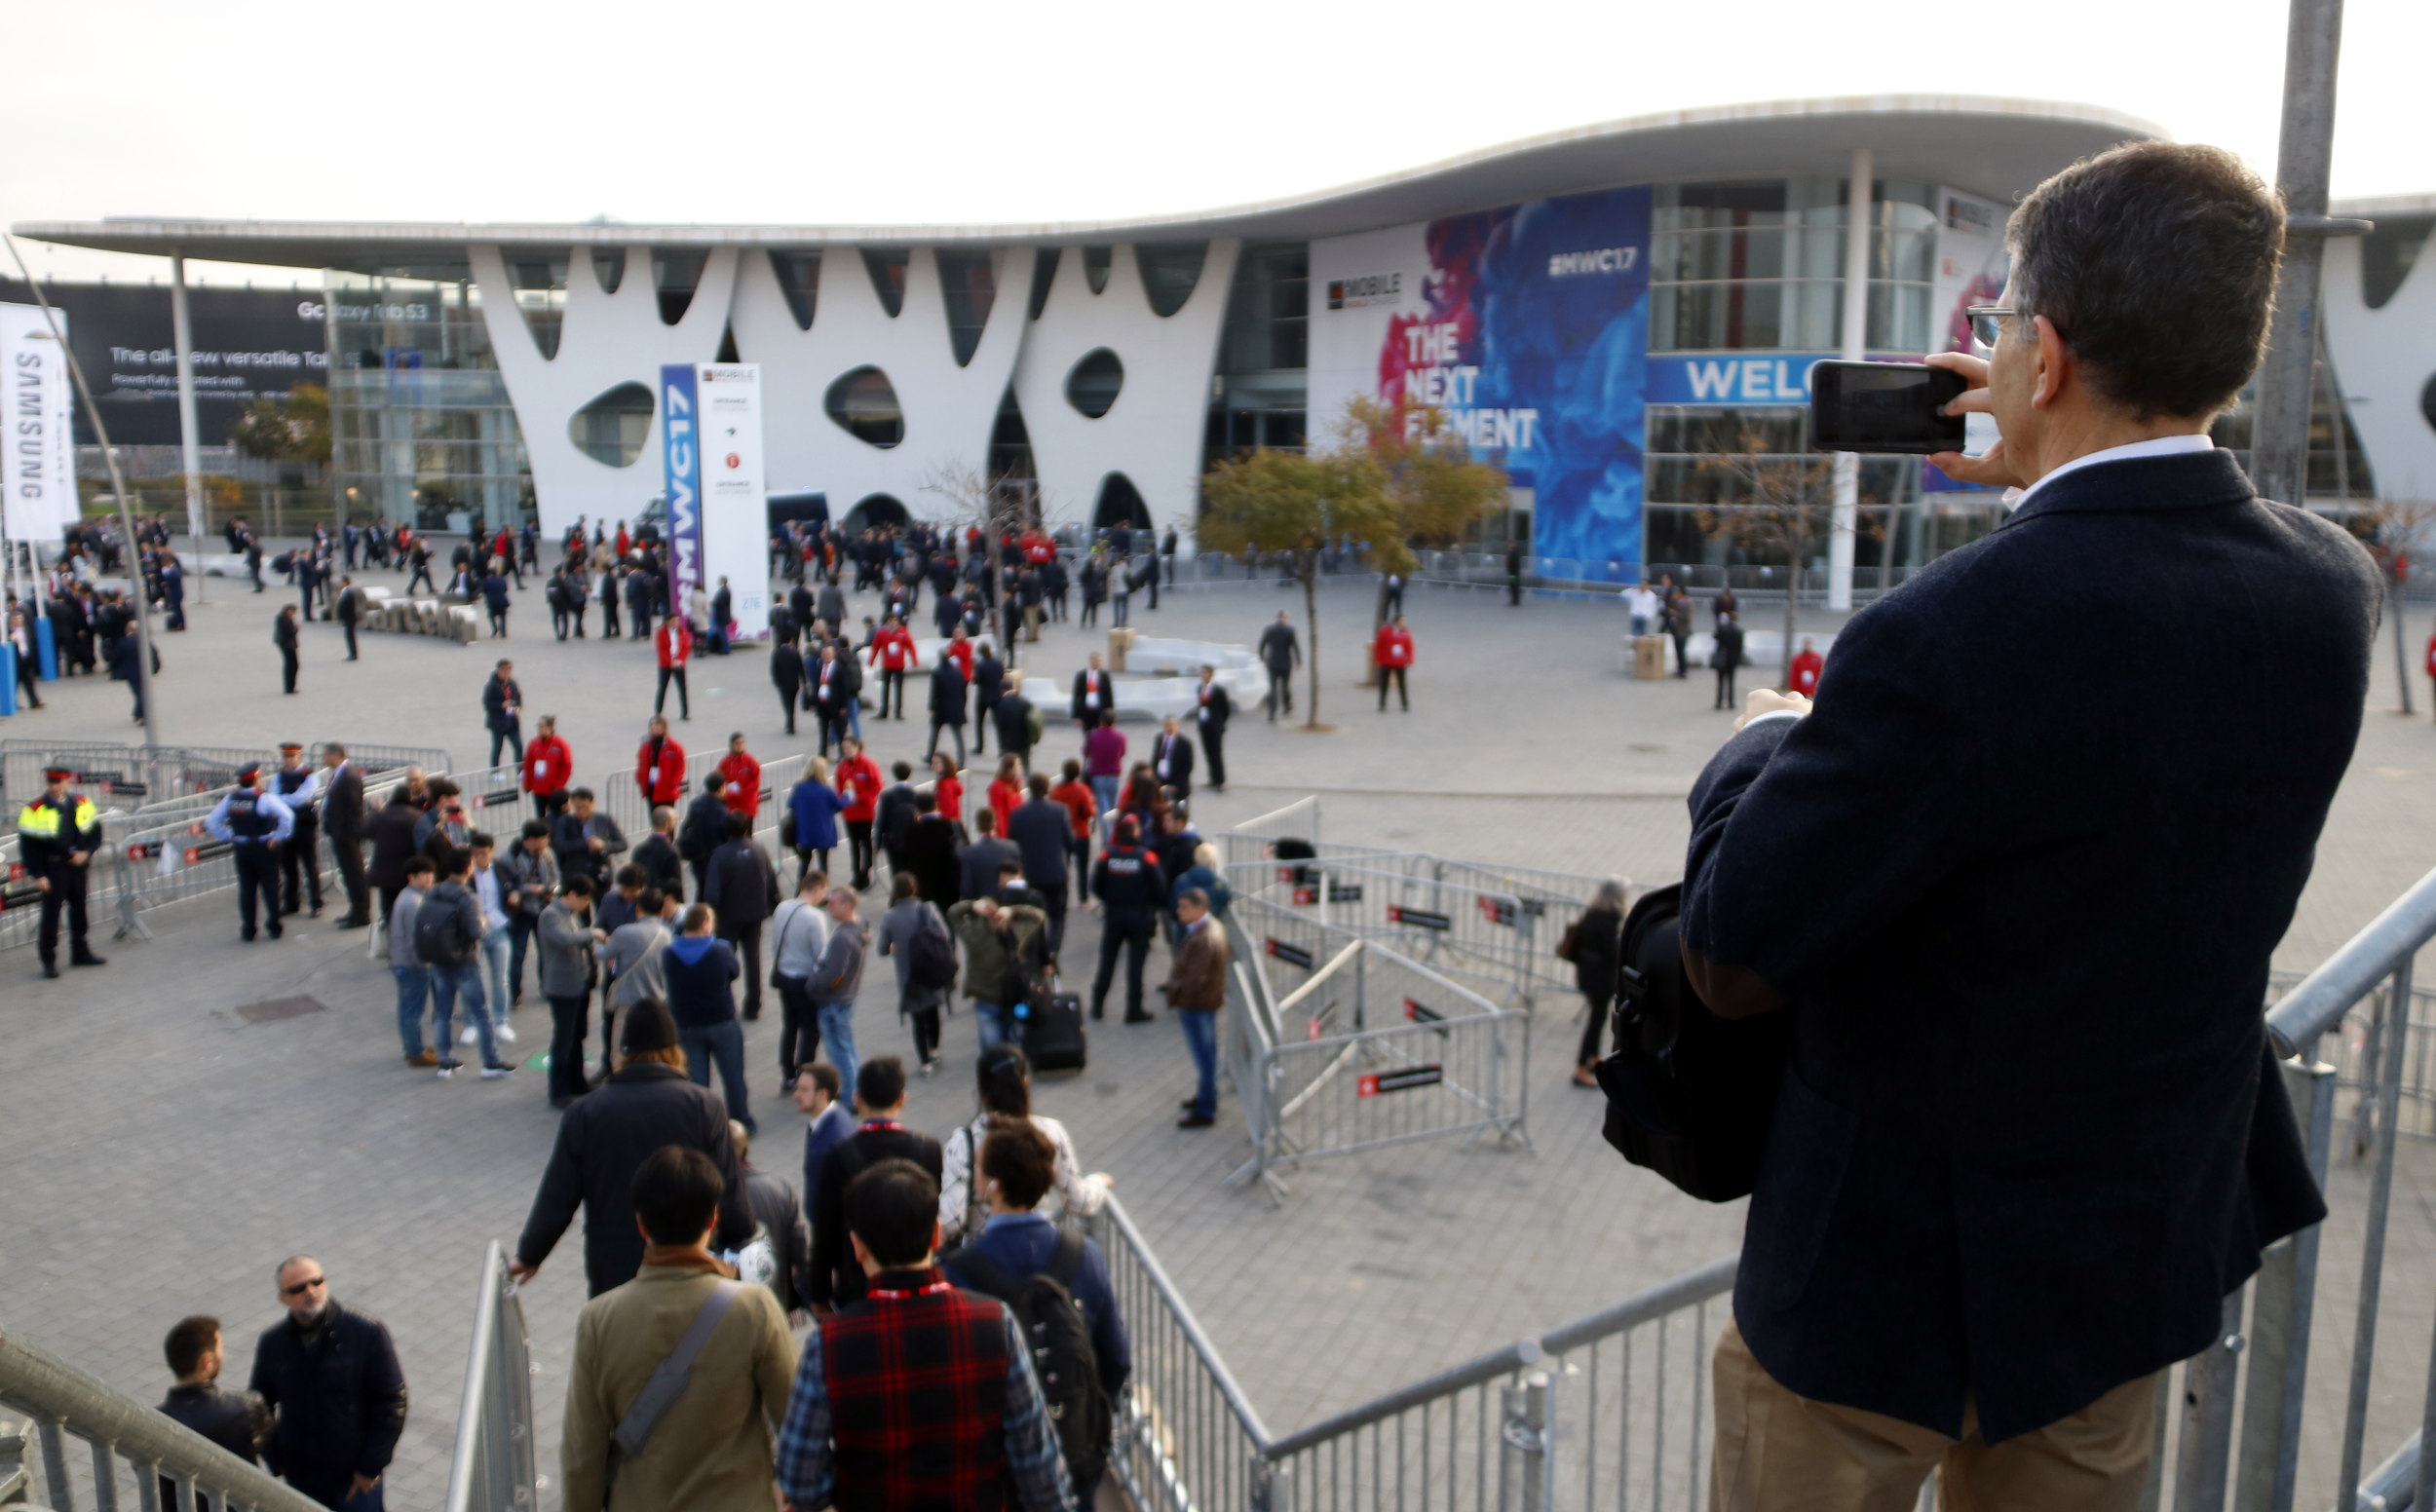 A man takes a picture of the Mobile World Congress' main entrance, at L'Hospitalet Gran Via (by ACN)